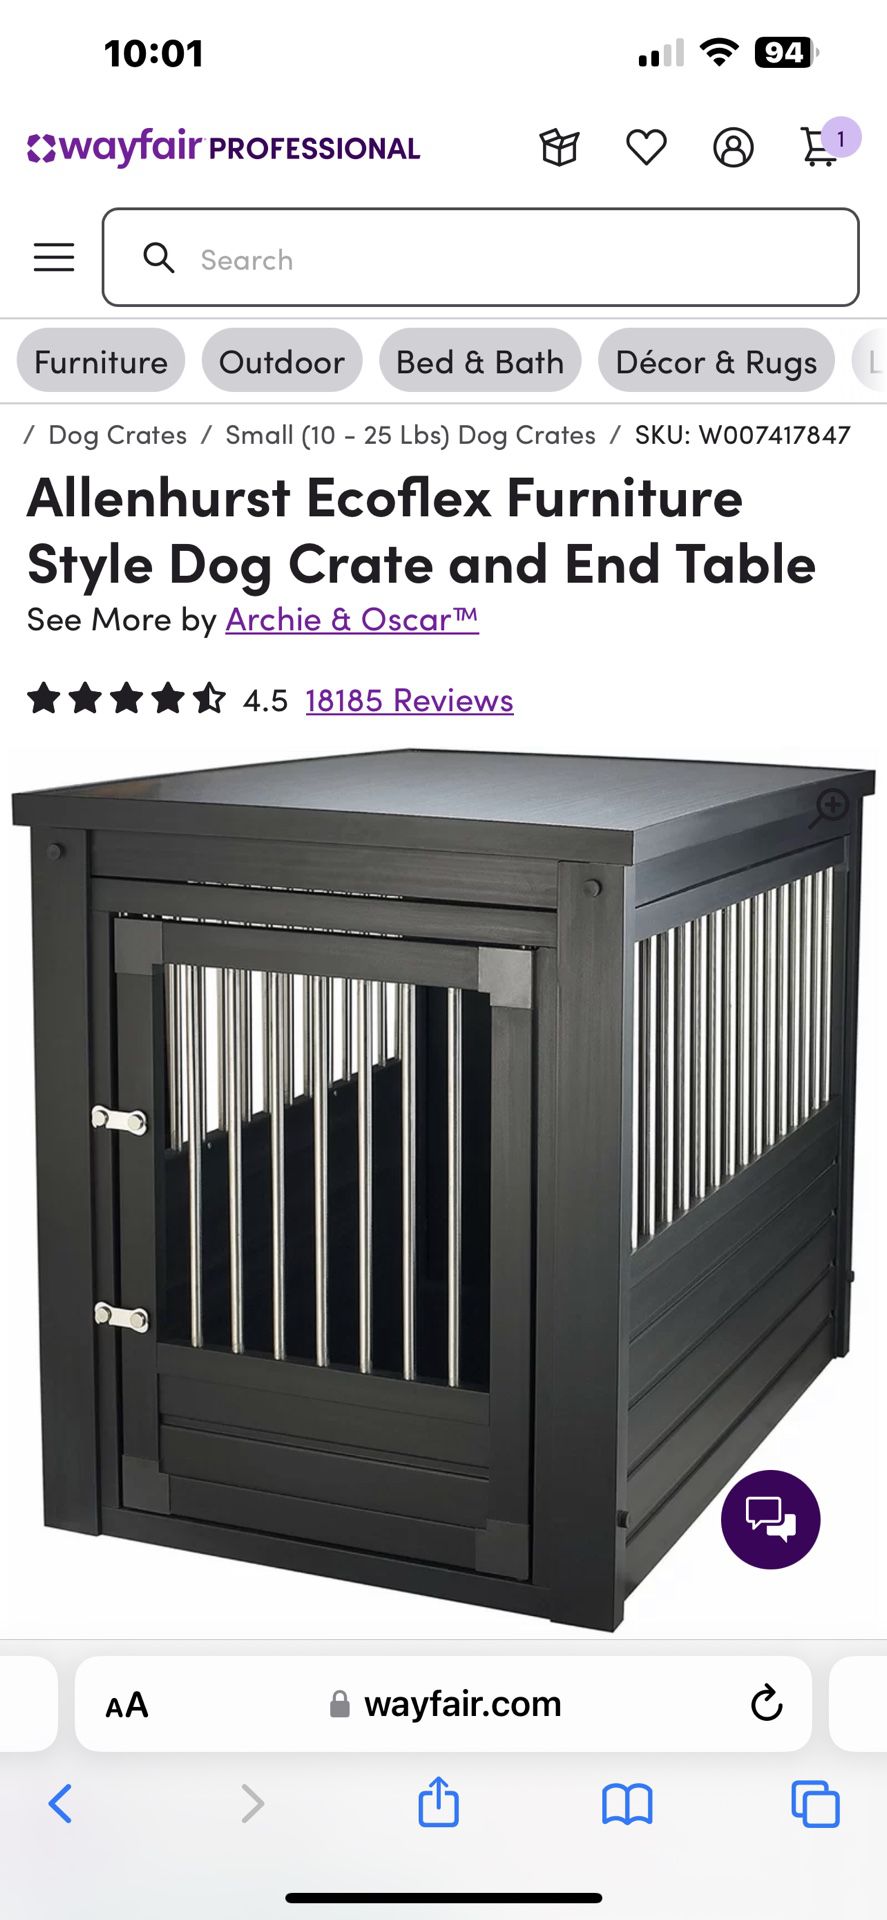 Dog crate - Like New, Barely used 